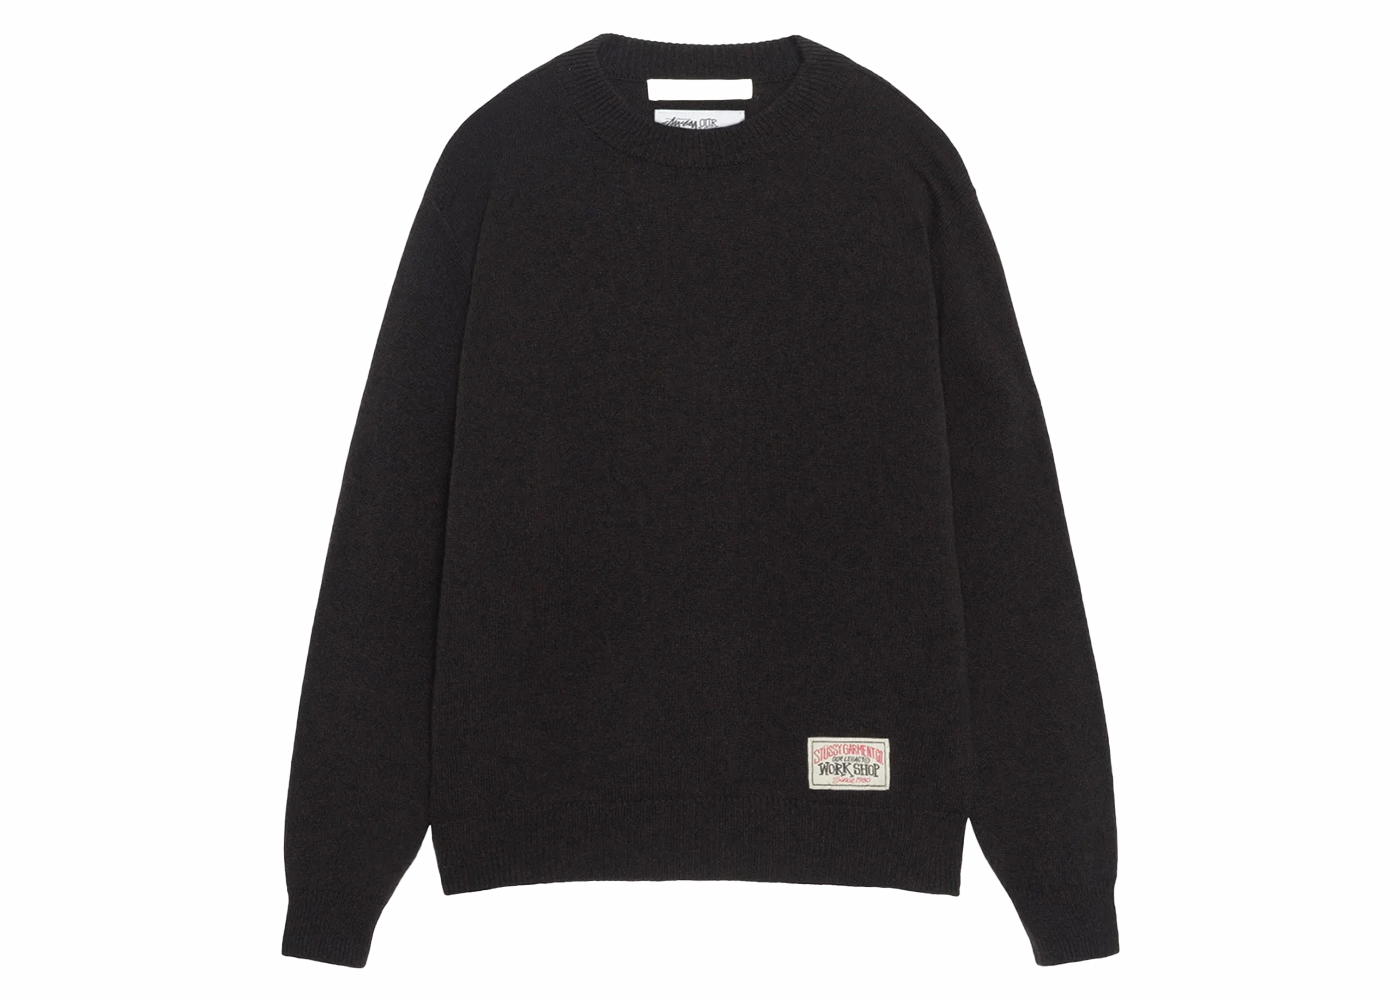 Stussy x Our Legacy Knitted Roundneck Dark Brown Surfman Men's